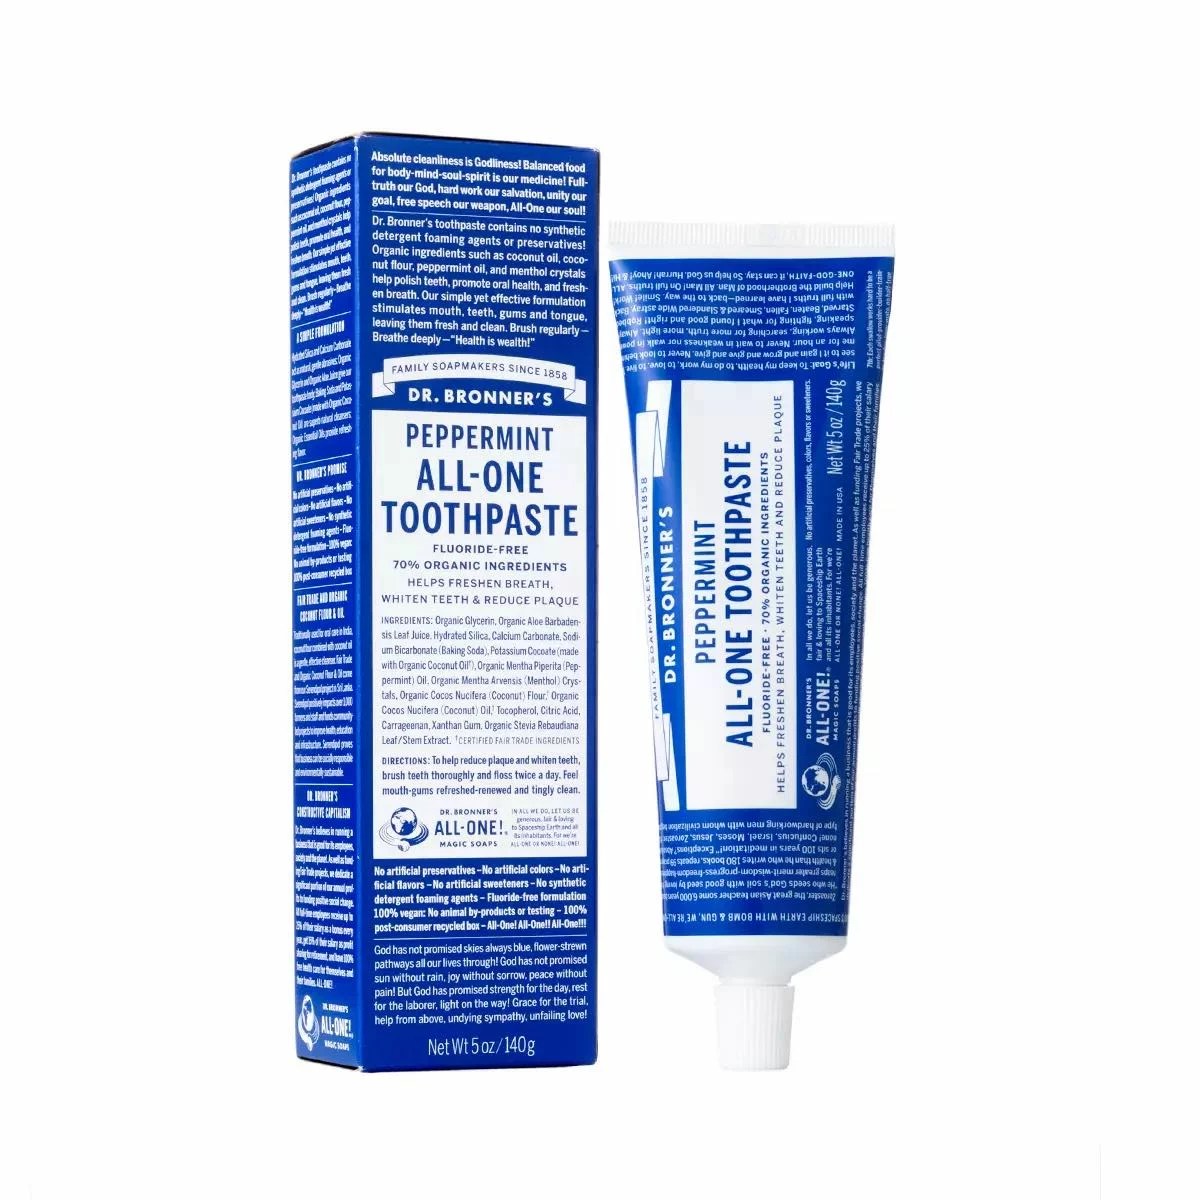 Dr. Bronner's natural Toothpaste